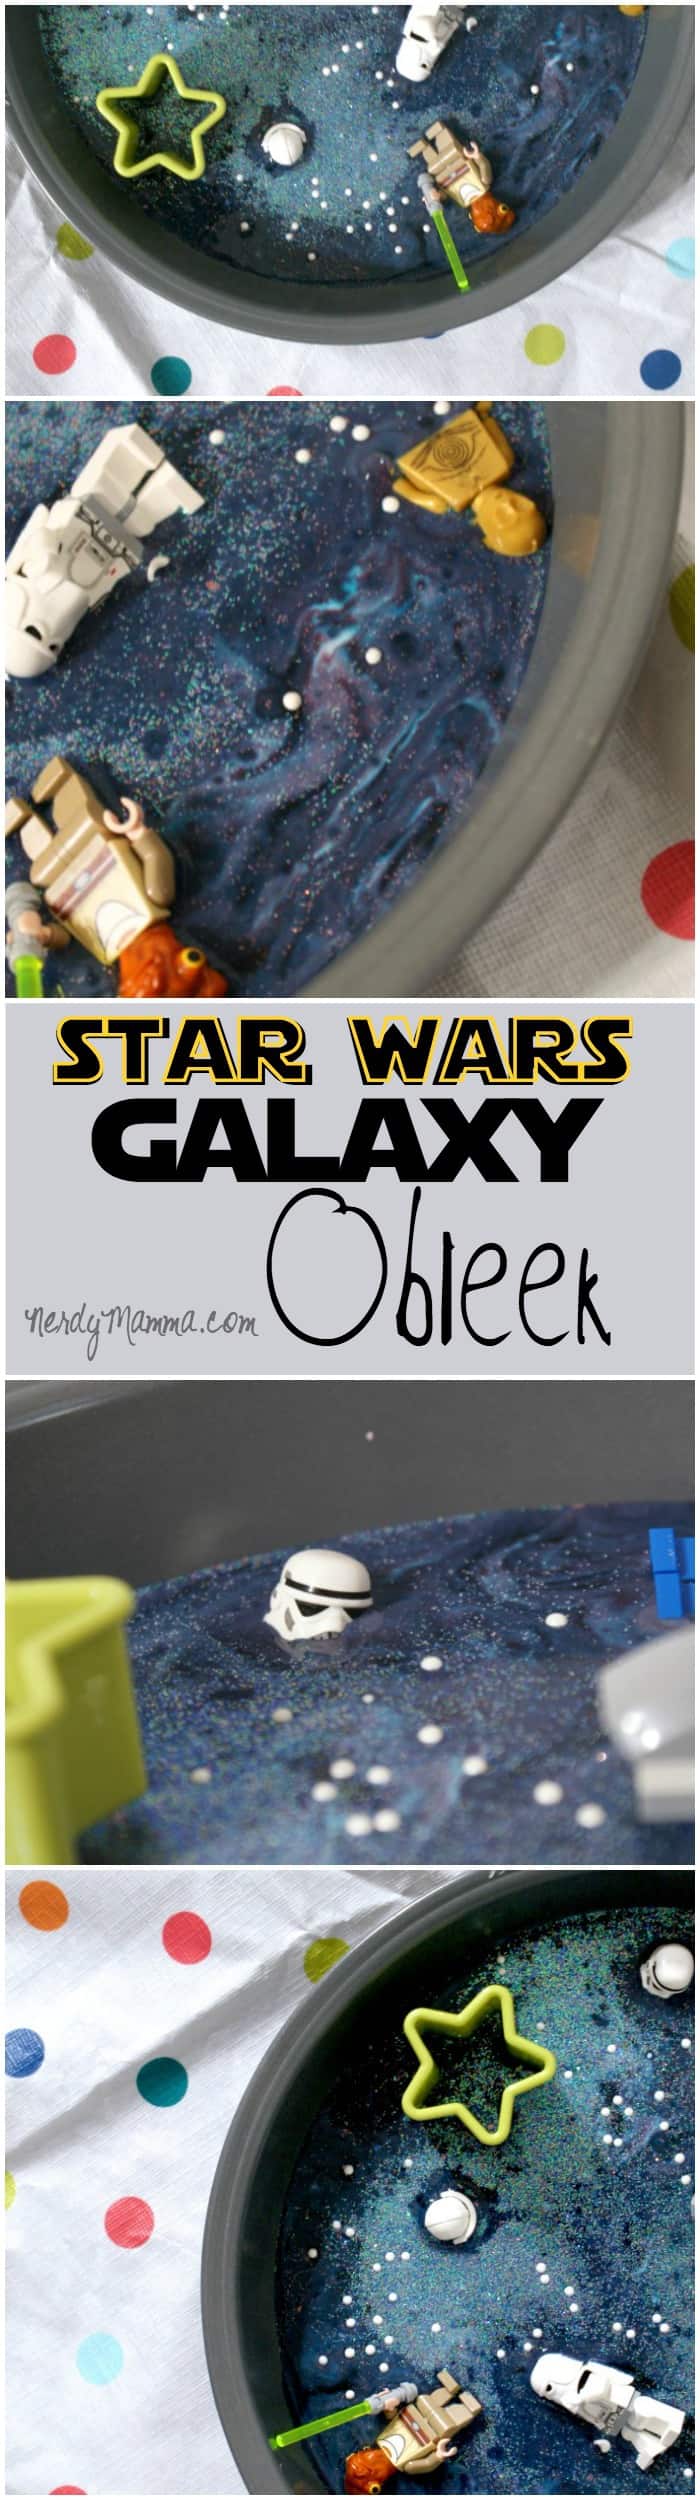 My kids had so much fun playing with this galaxy obleek. It was like the set of star wars laid-down on our table to play! LOL!